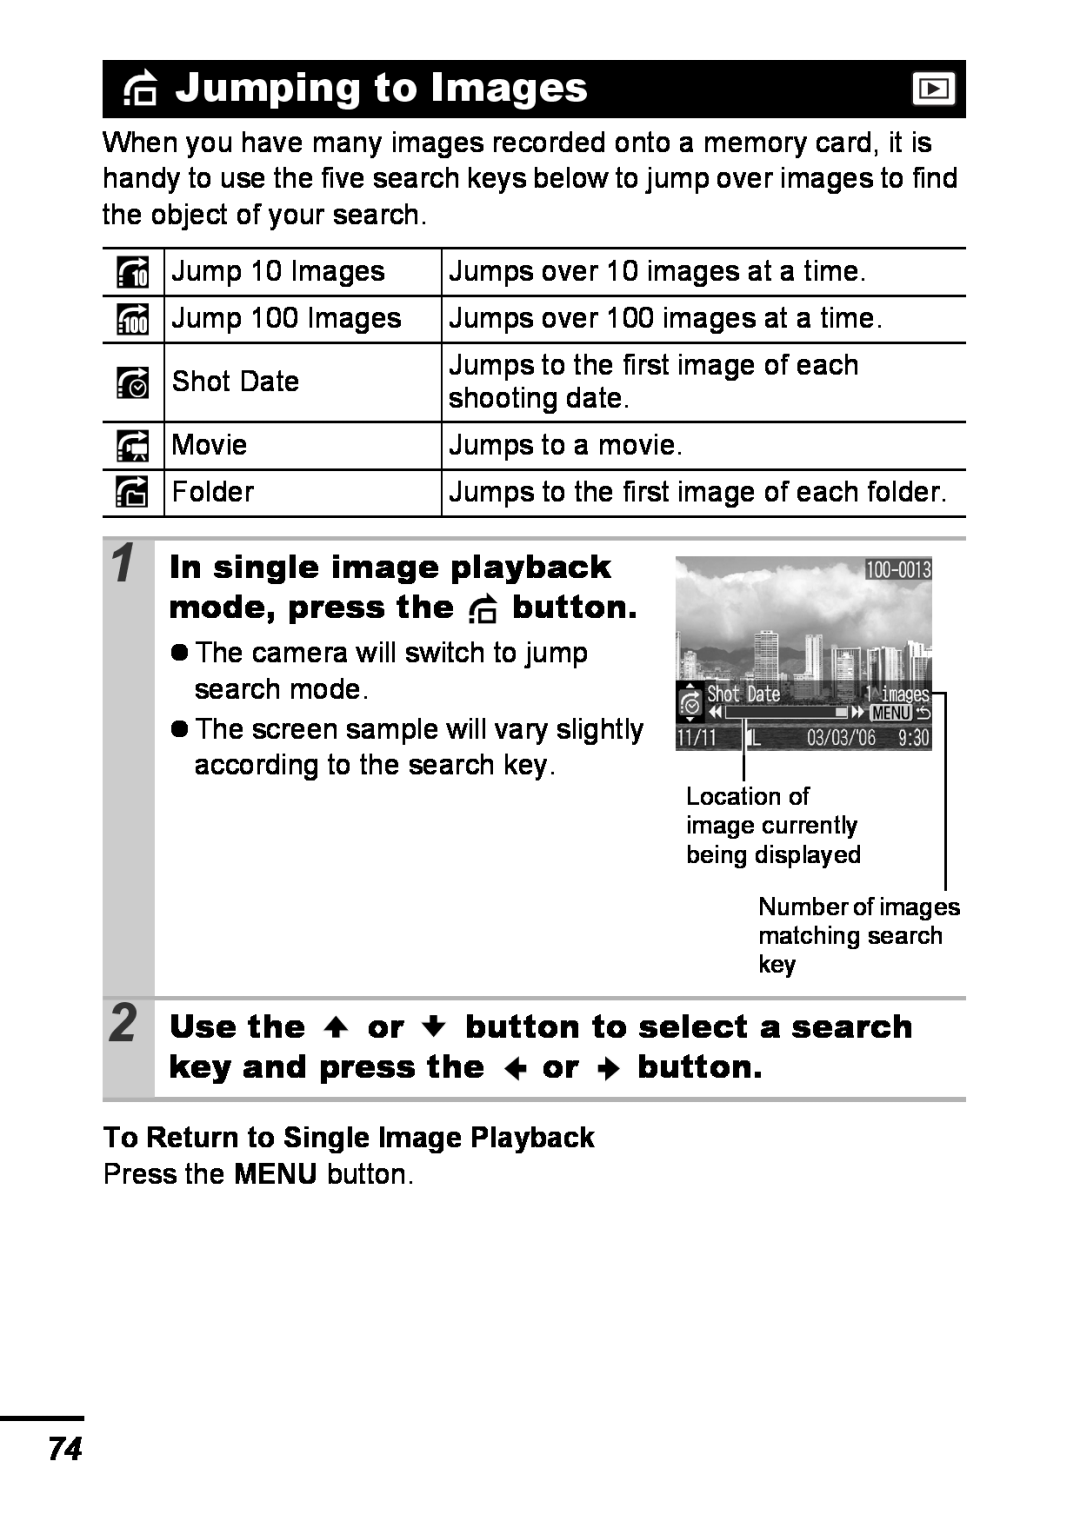 Canon A540 appendix Jumping to Images, In single image playback mode, press the button, To Return to Single Image Playback 